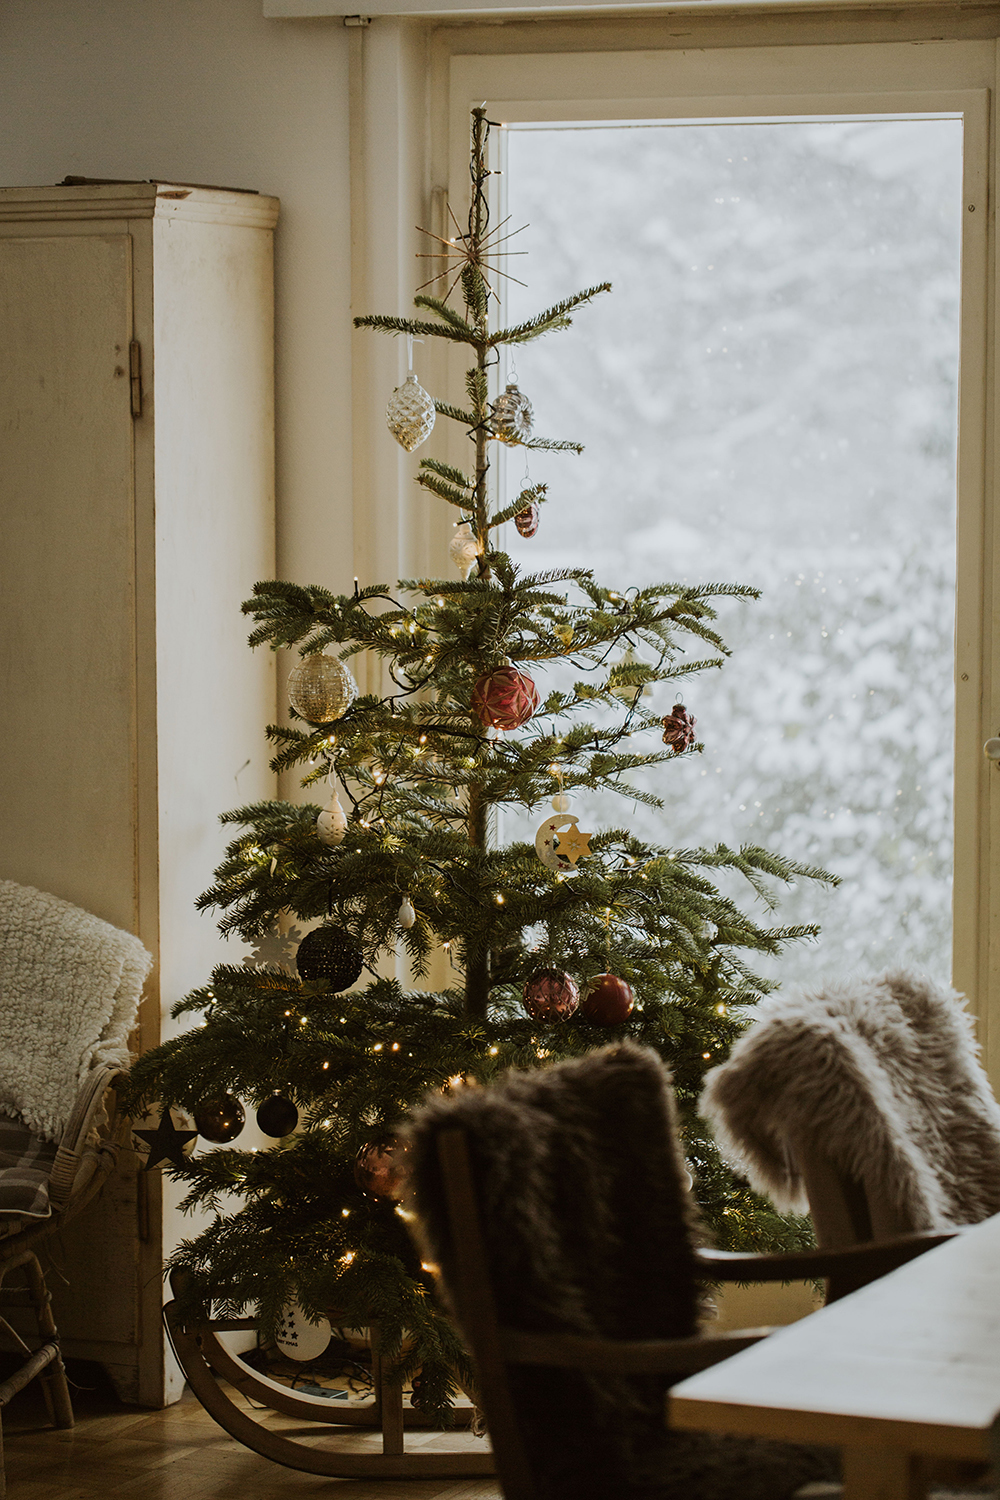 Real Christmas Tree 101: Everything You Need to Know About Tree Care